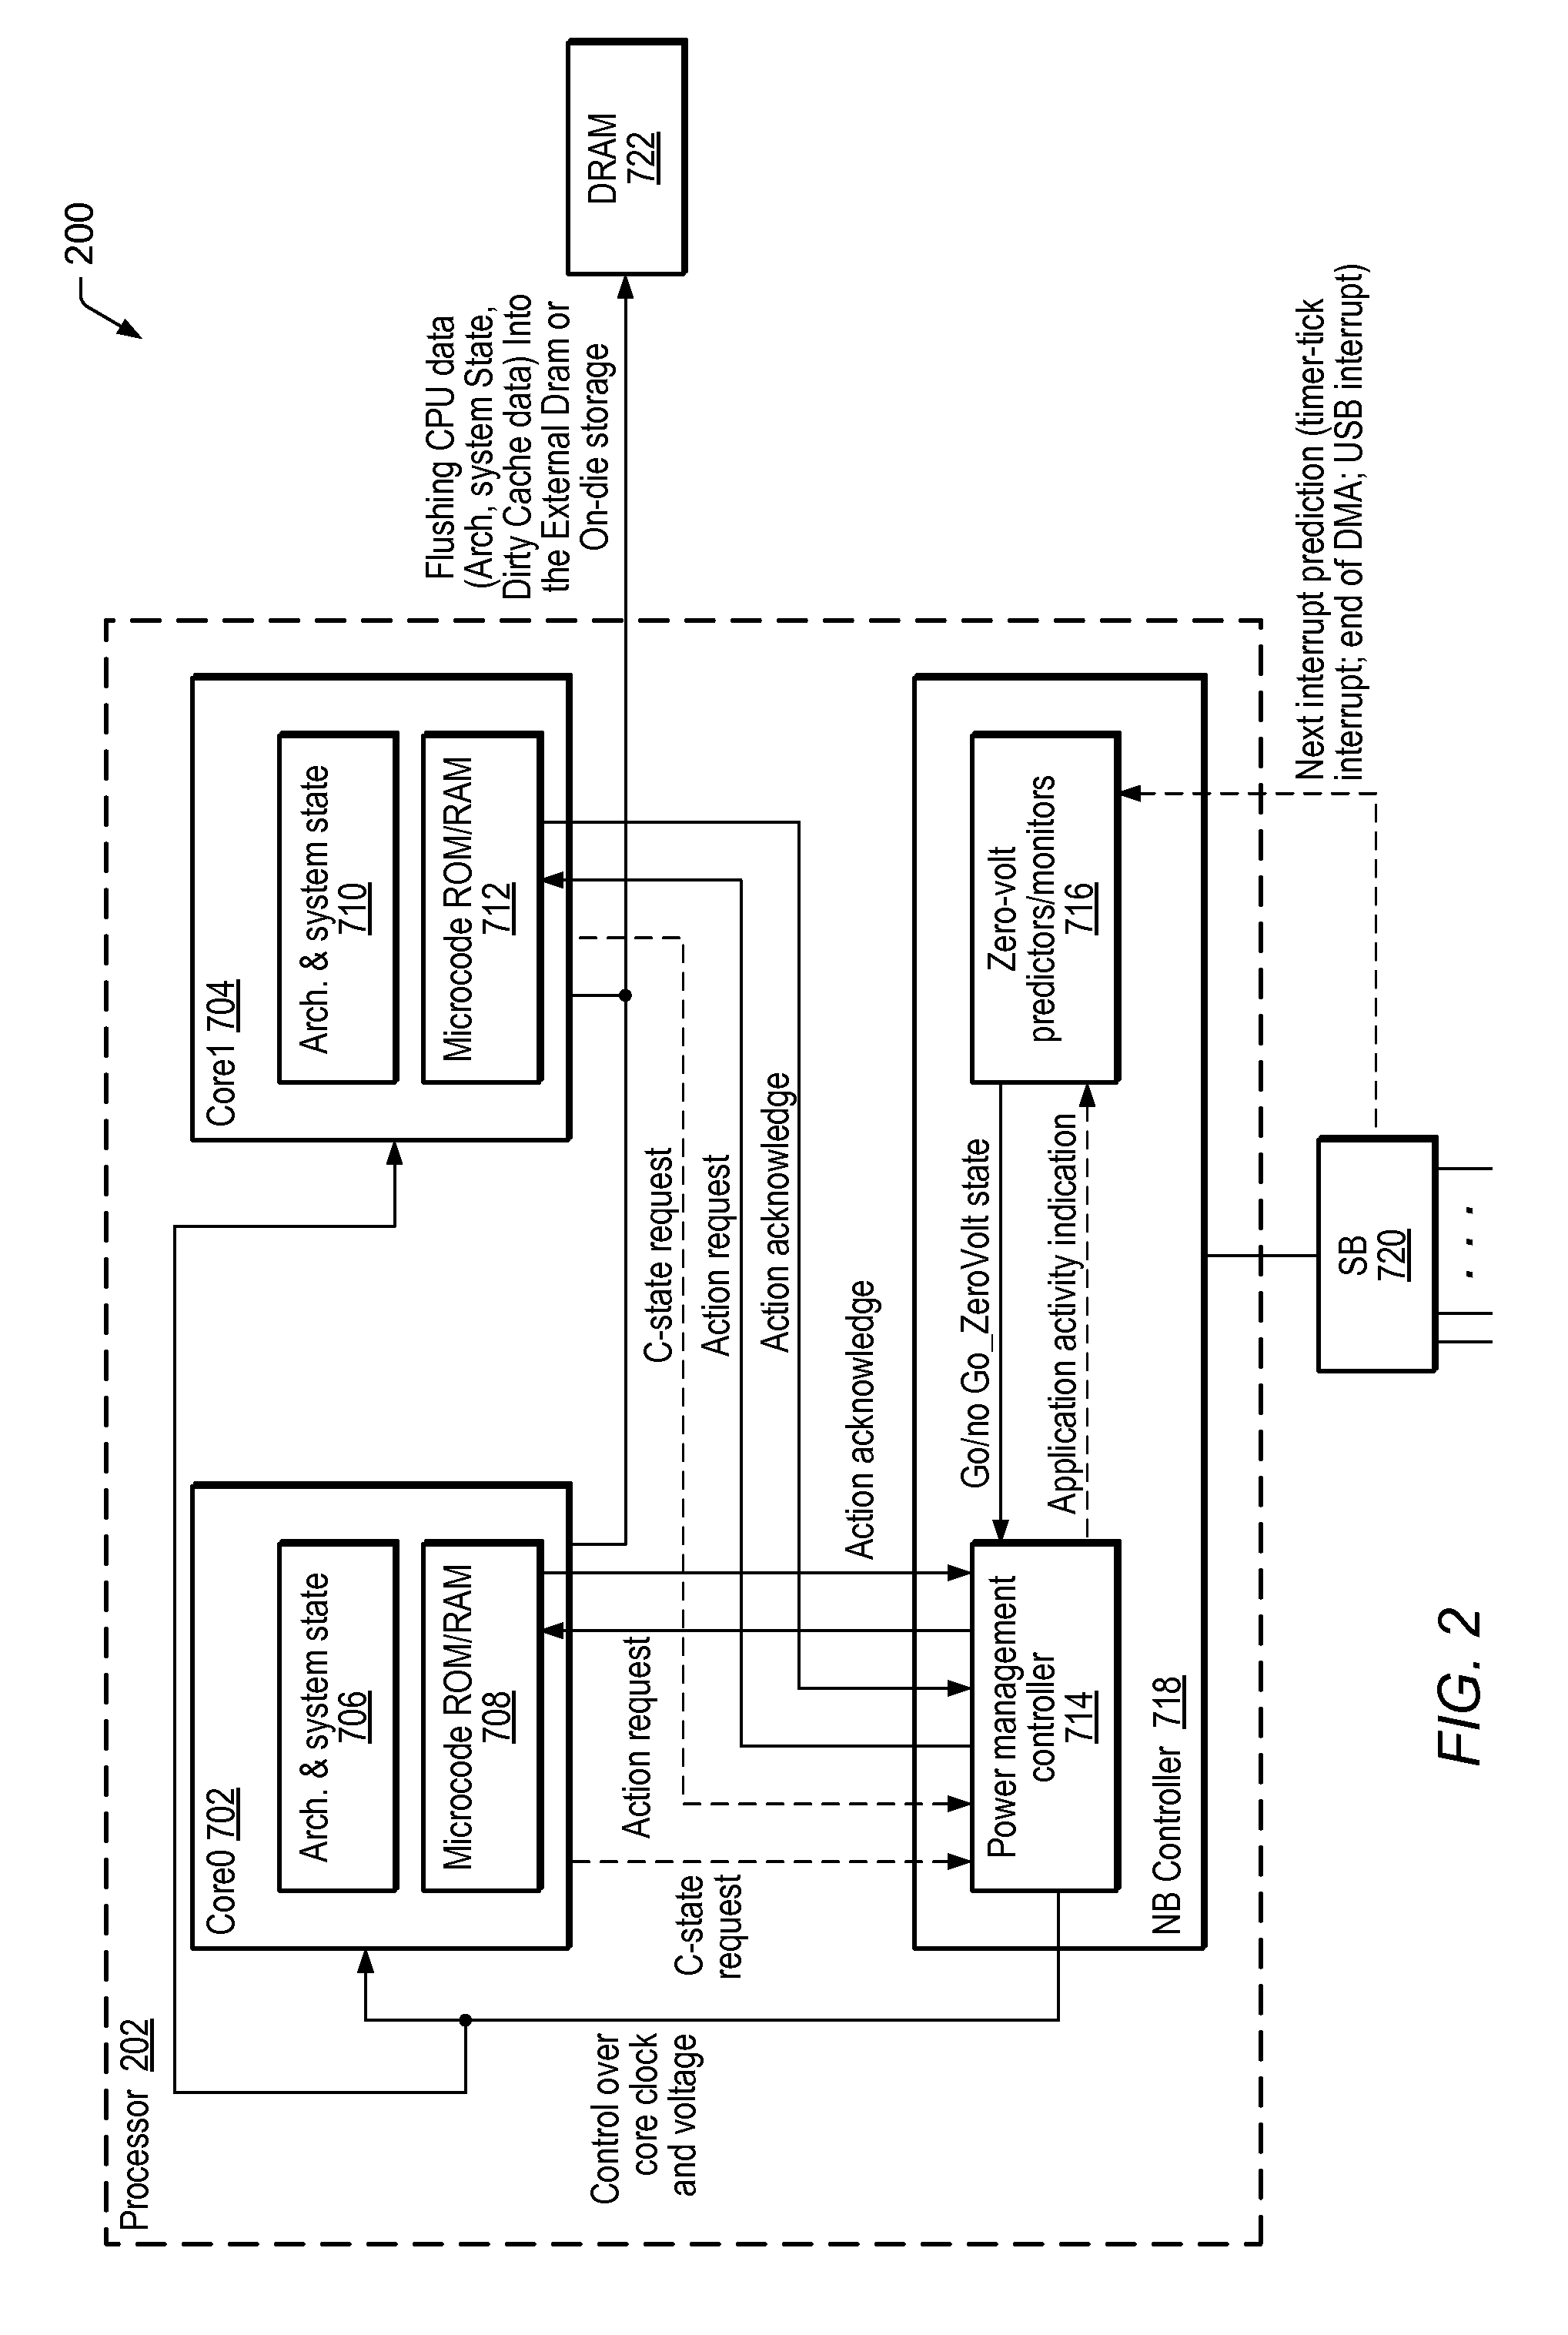 Protocol for Transitioning In and Out of Zero-Power State